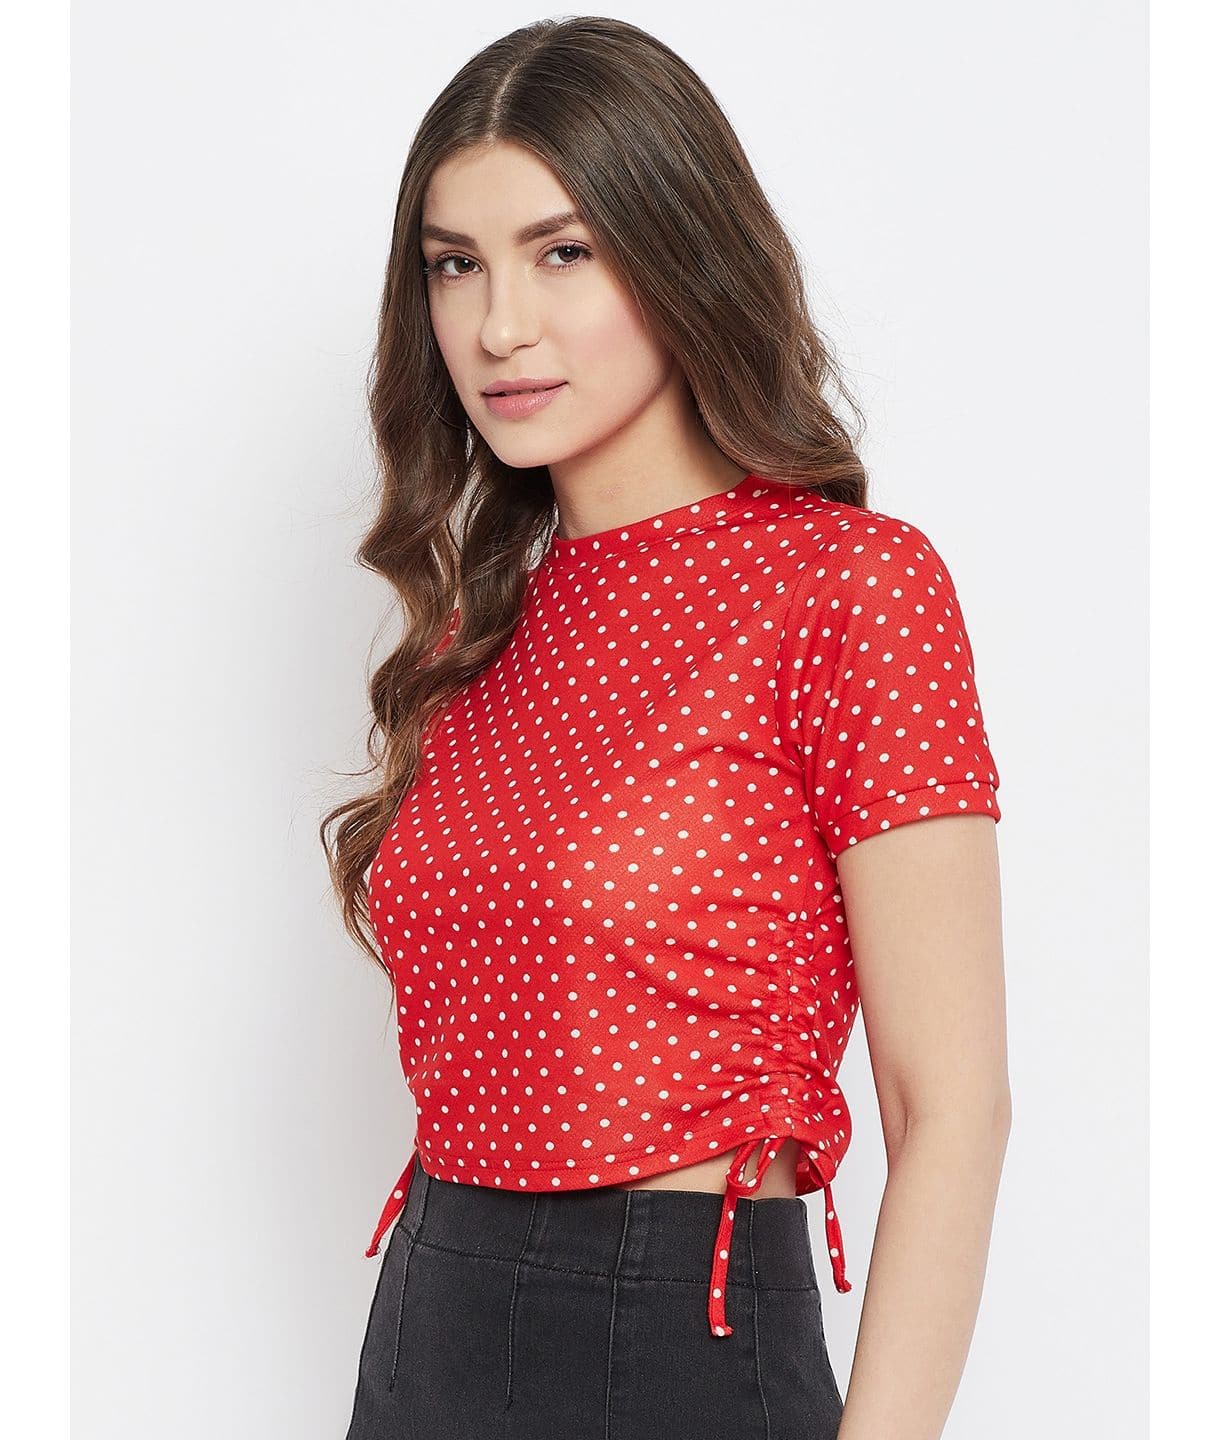 Cotton Stretchable Side Drawstring Crop Top - Uptownie